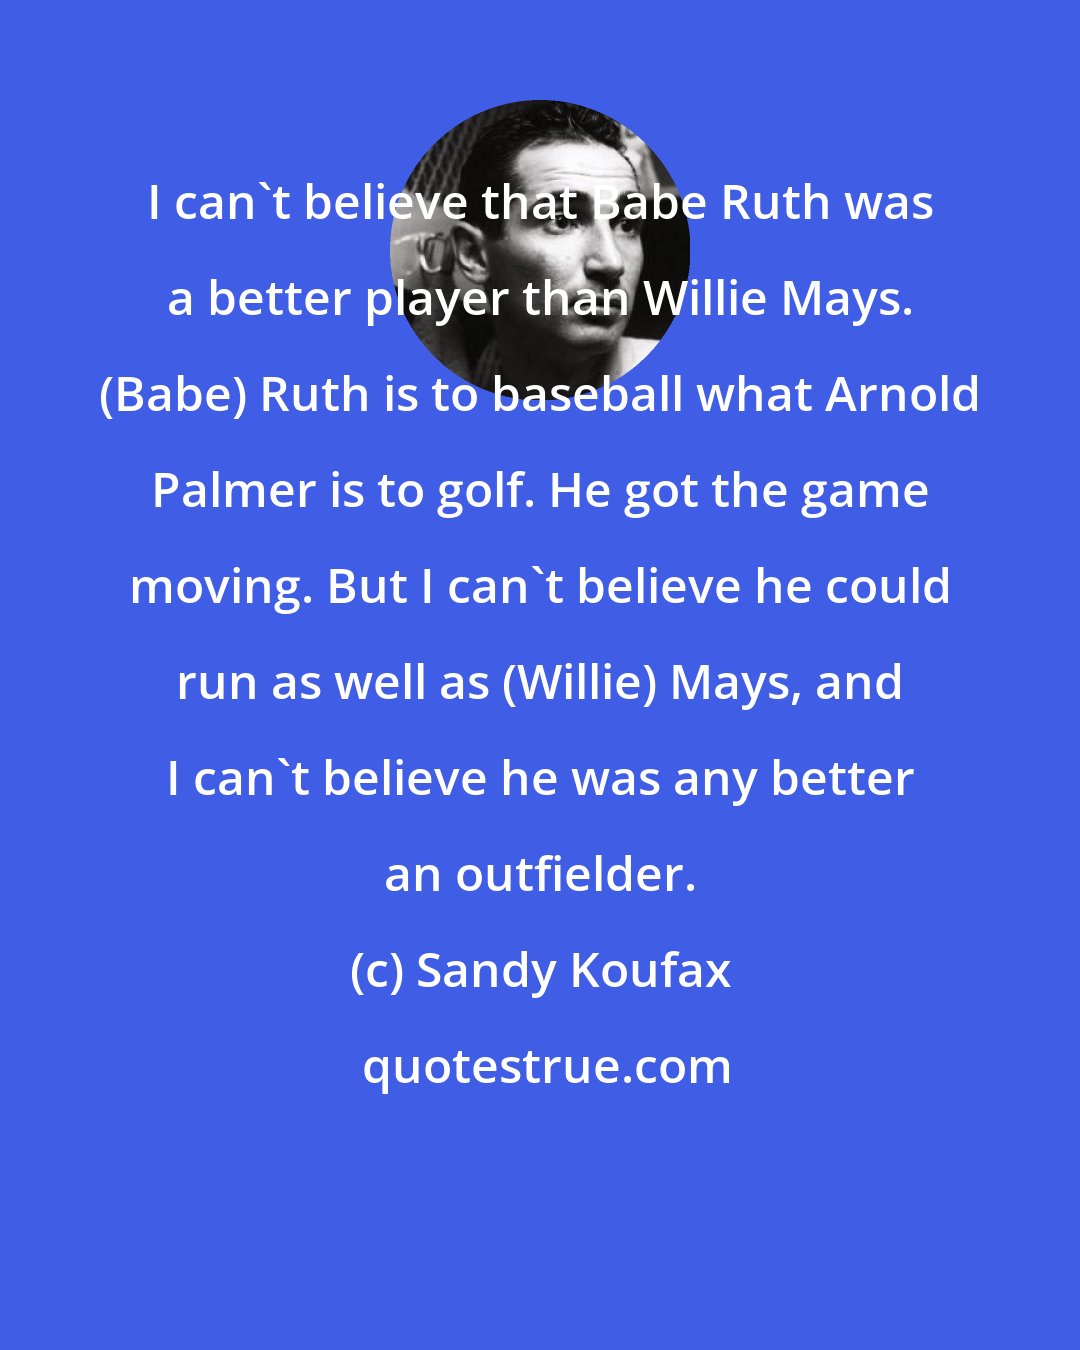 Sandy Koufax: I can't believe that Babe Ruth was a better player than Willie Mays. (Babe) Ruth is to baseball what Arnold Palmer is to golf. He got the game moving. But I can't believe he could run as well as (Willie) Mays, and I can't believe he was any better an outfielder.